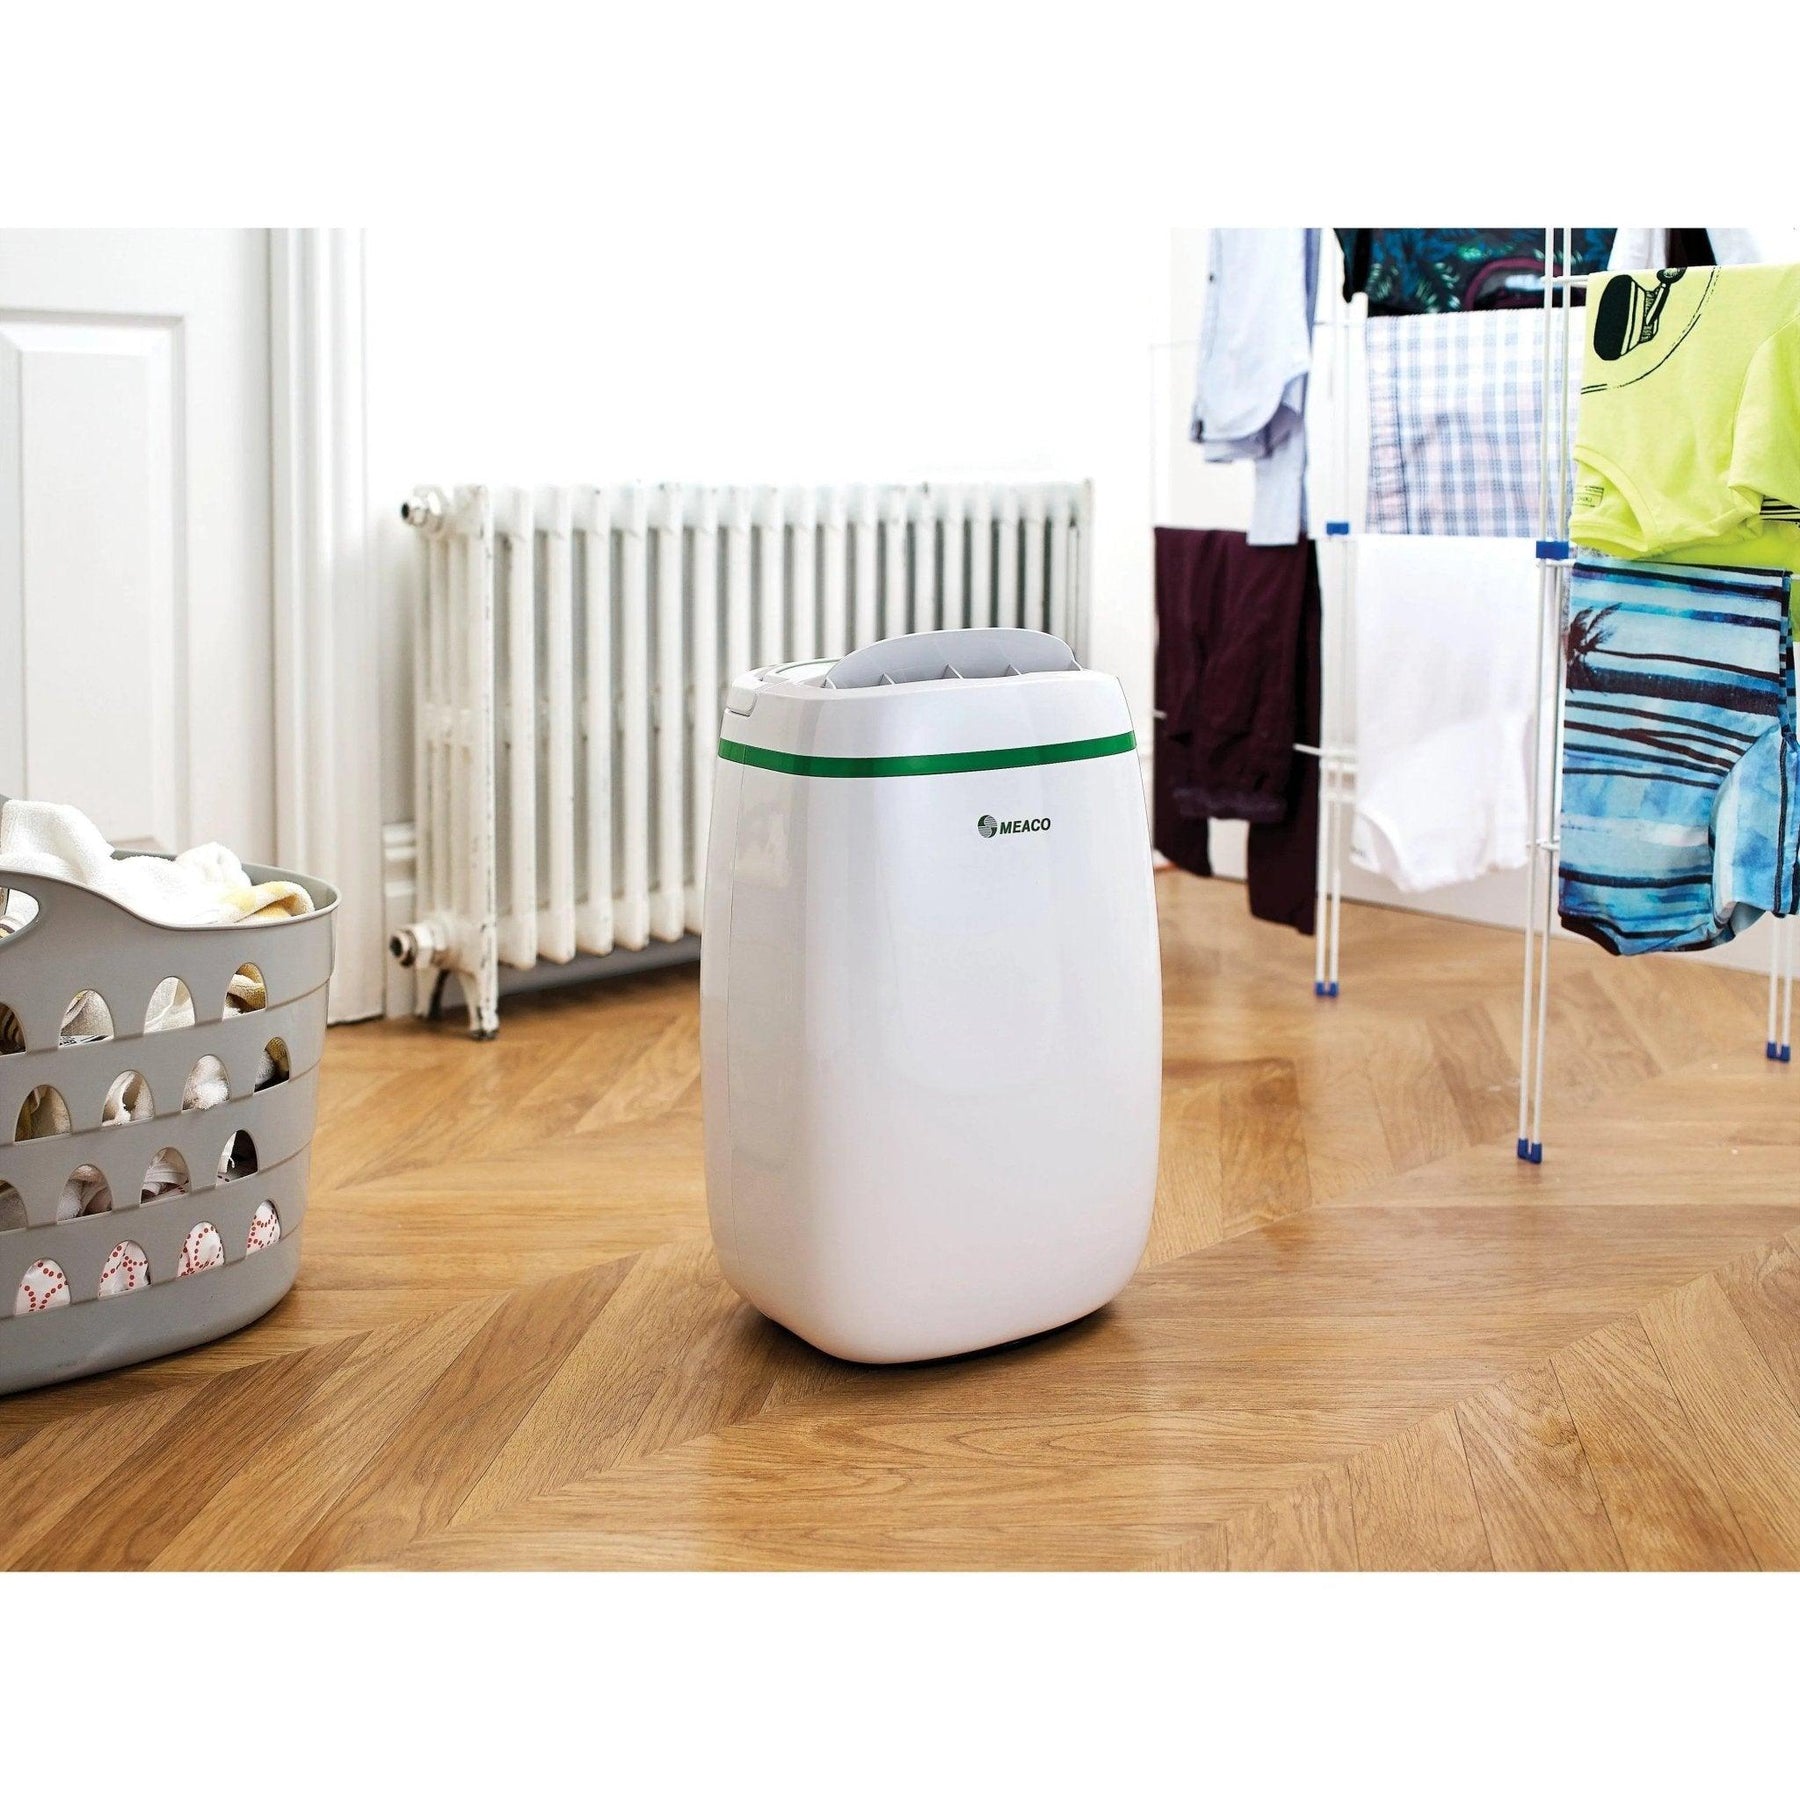 Meaco 12L Low Energy Dehumidifier Review - Solenco South Africa